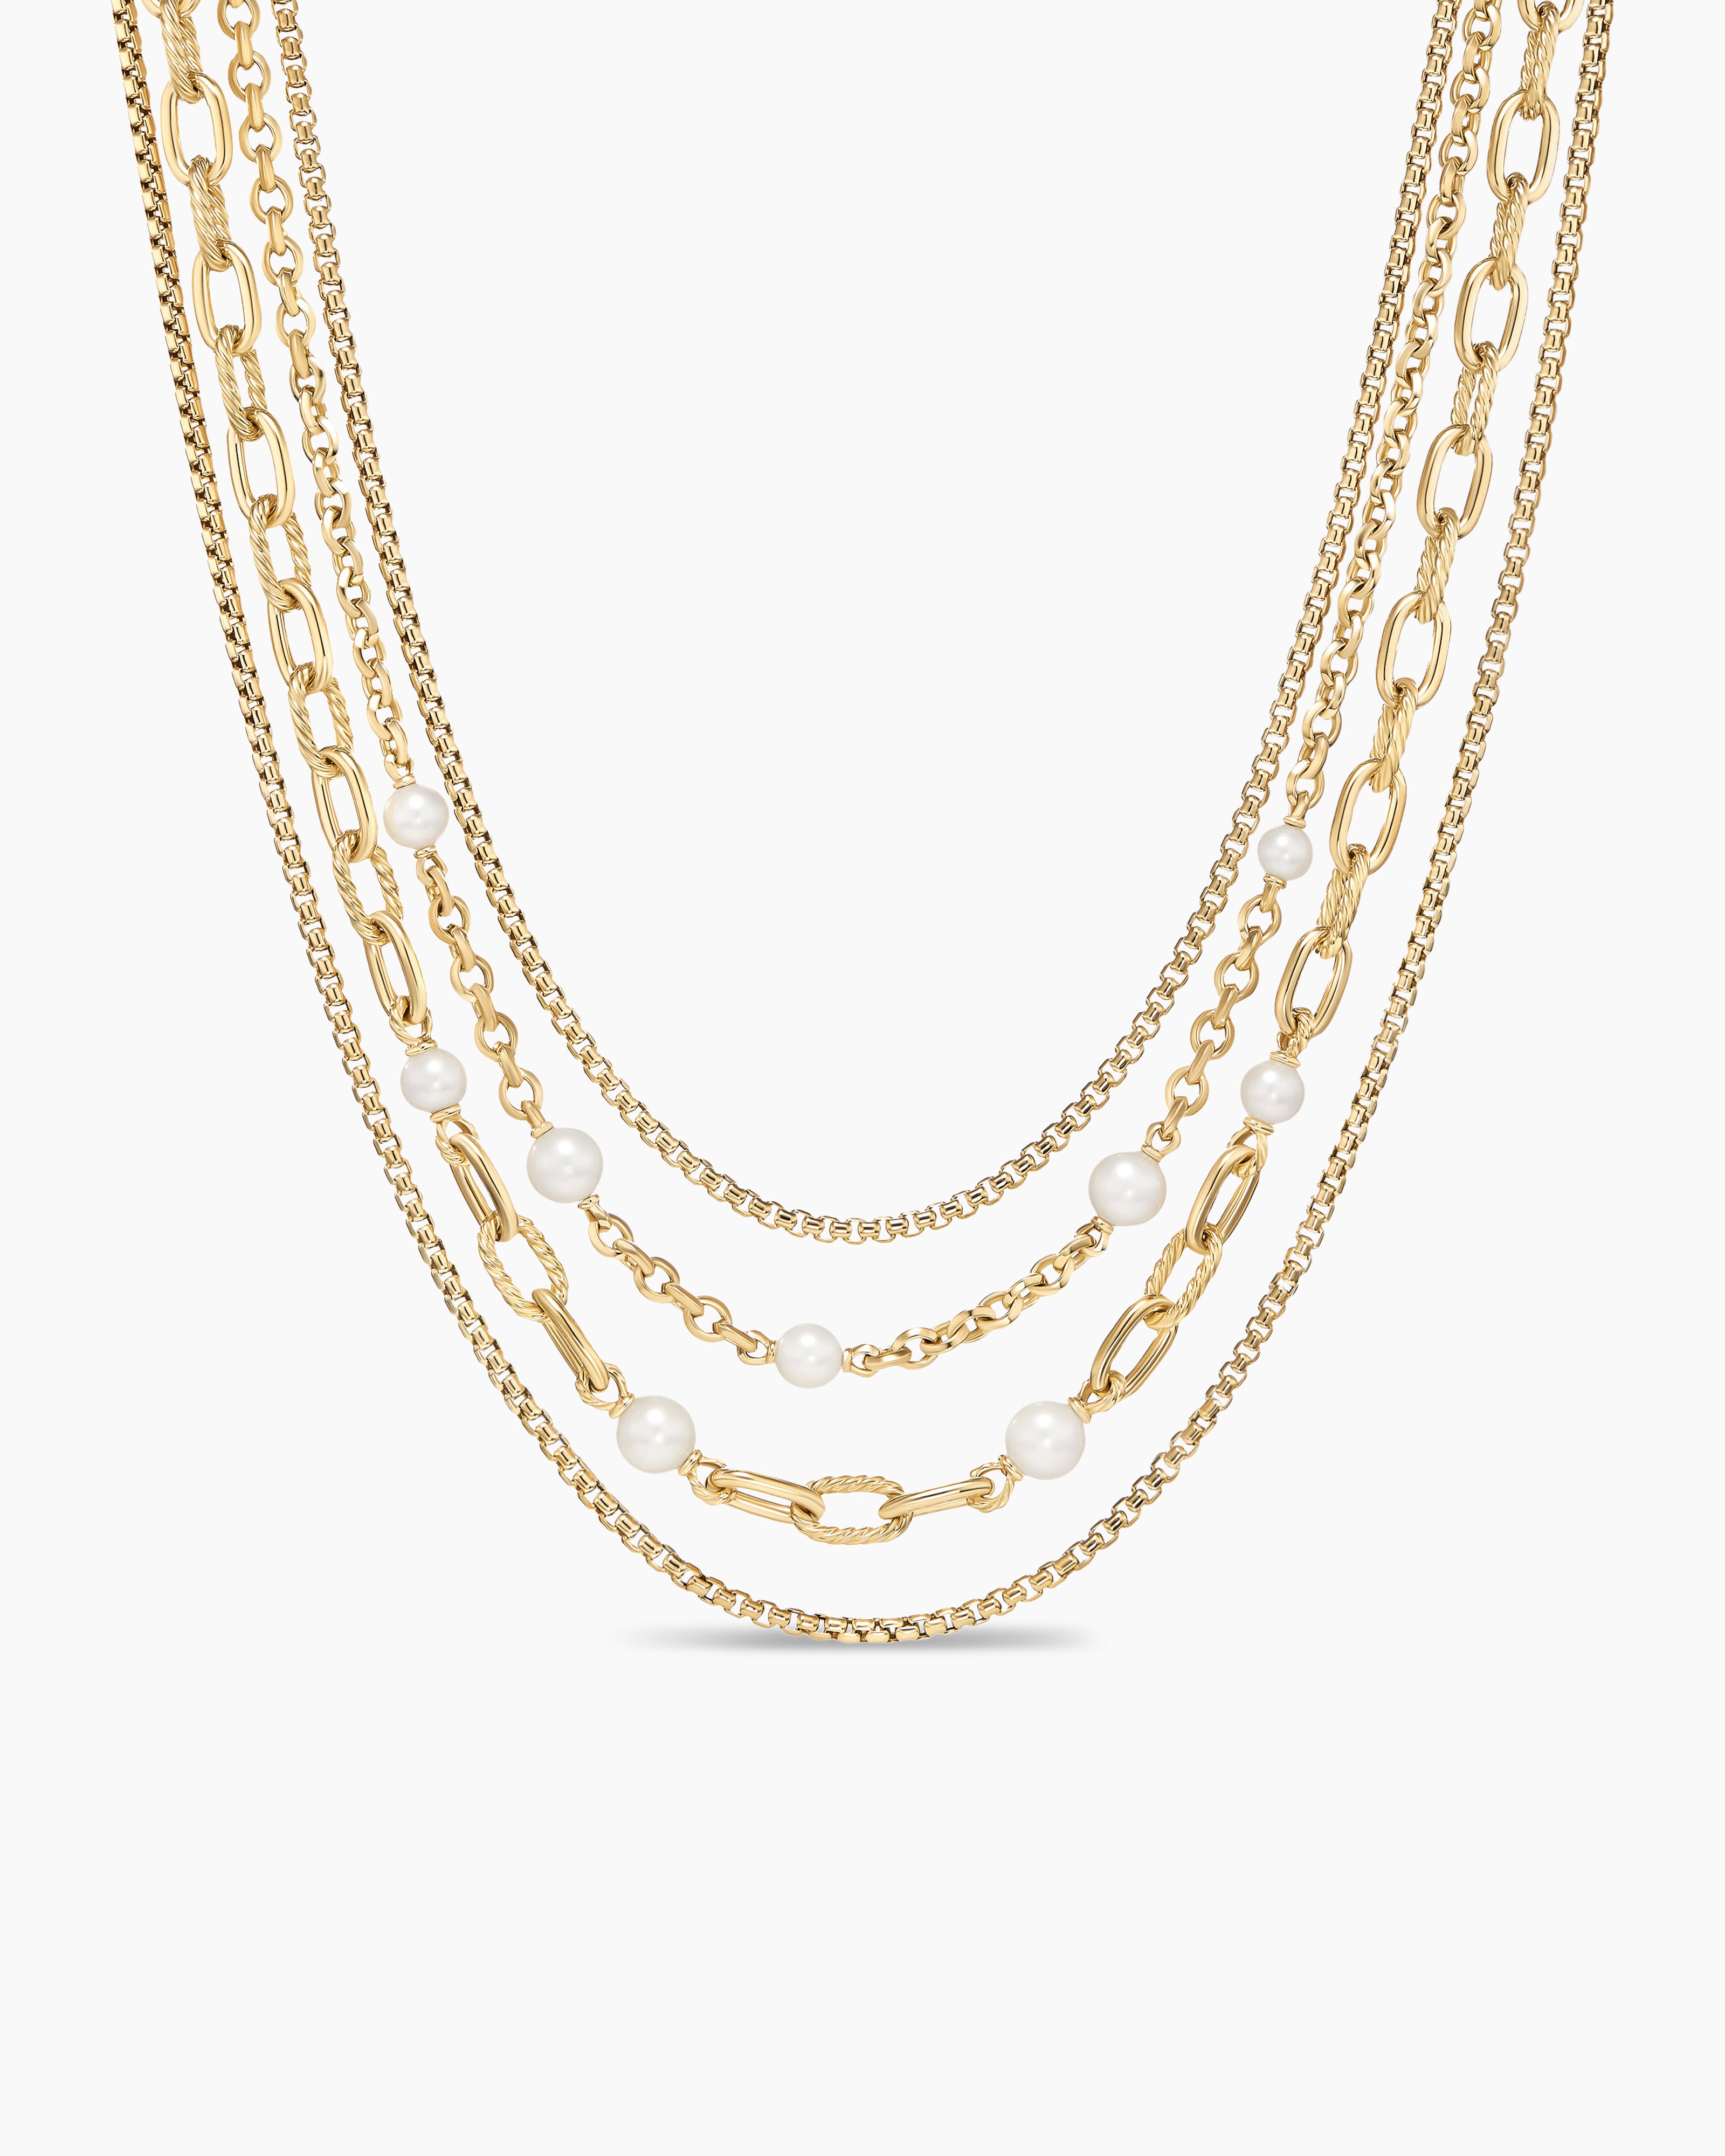 4 Layer Pearl Chain Necklace With Matt Gold Pendant